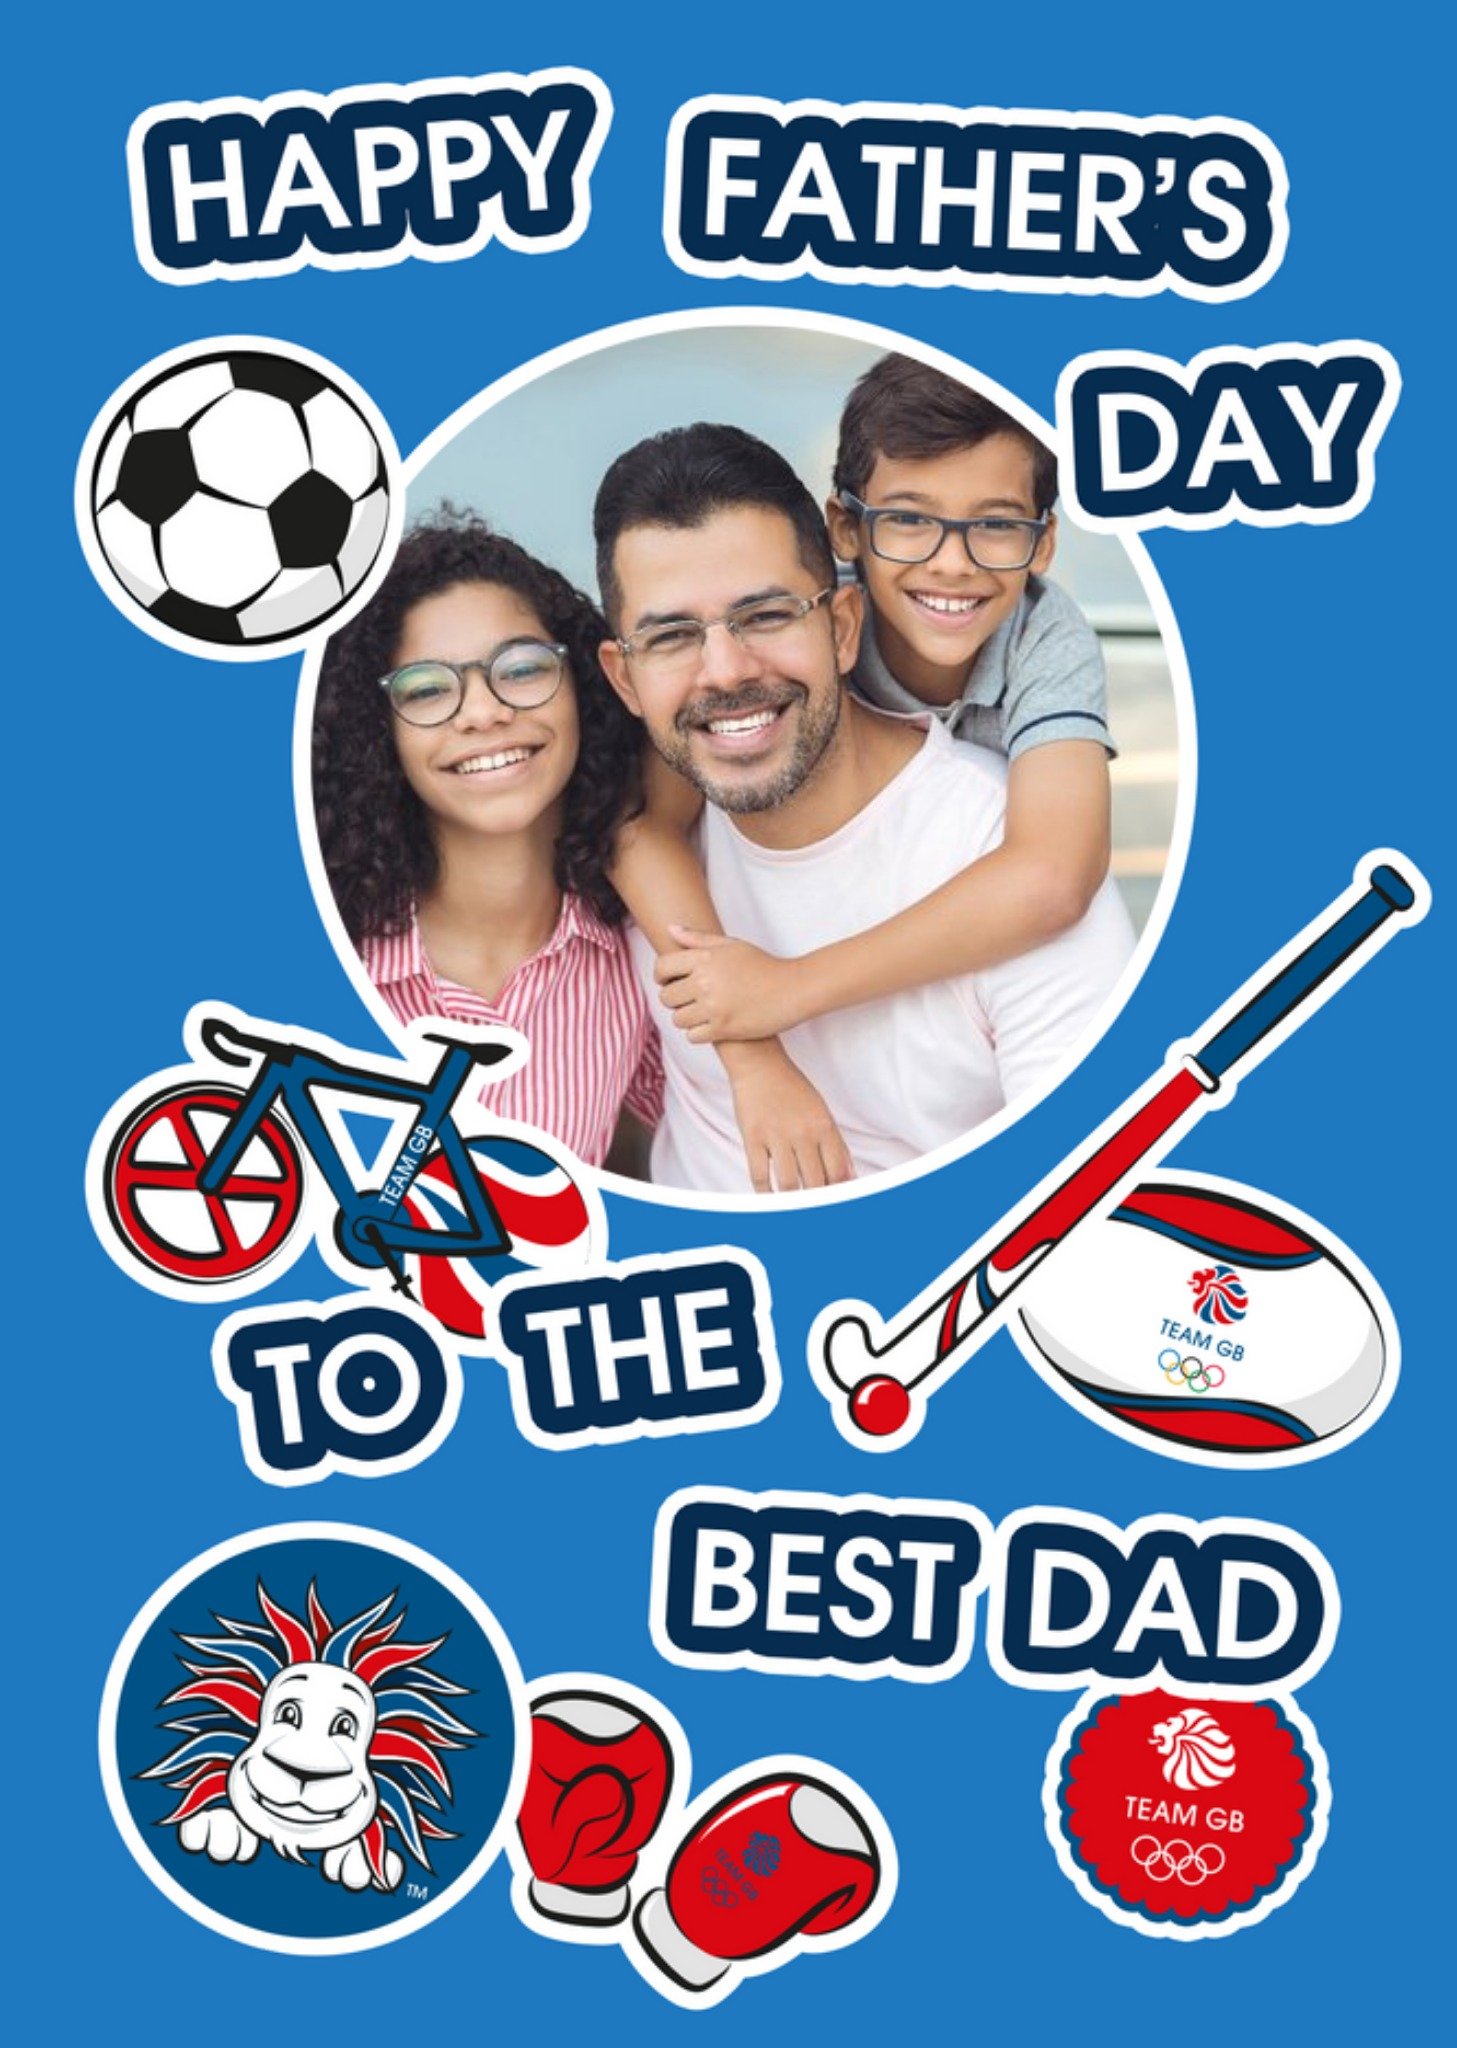 Moonpig Team Gb A Happy Fathers Day Photo Upload Card, Large